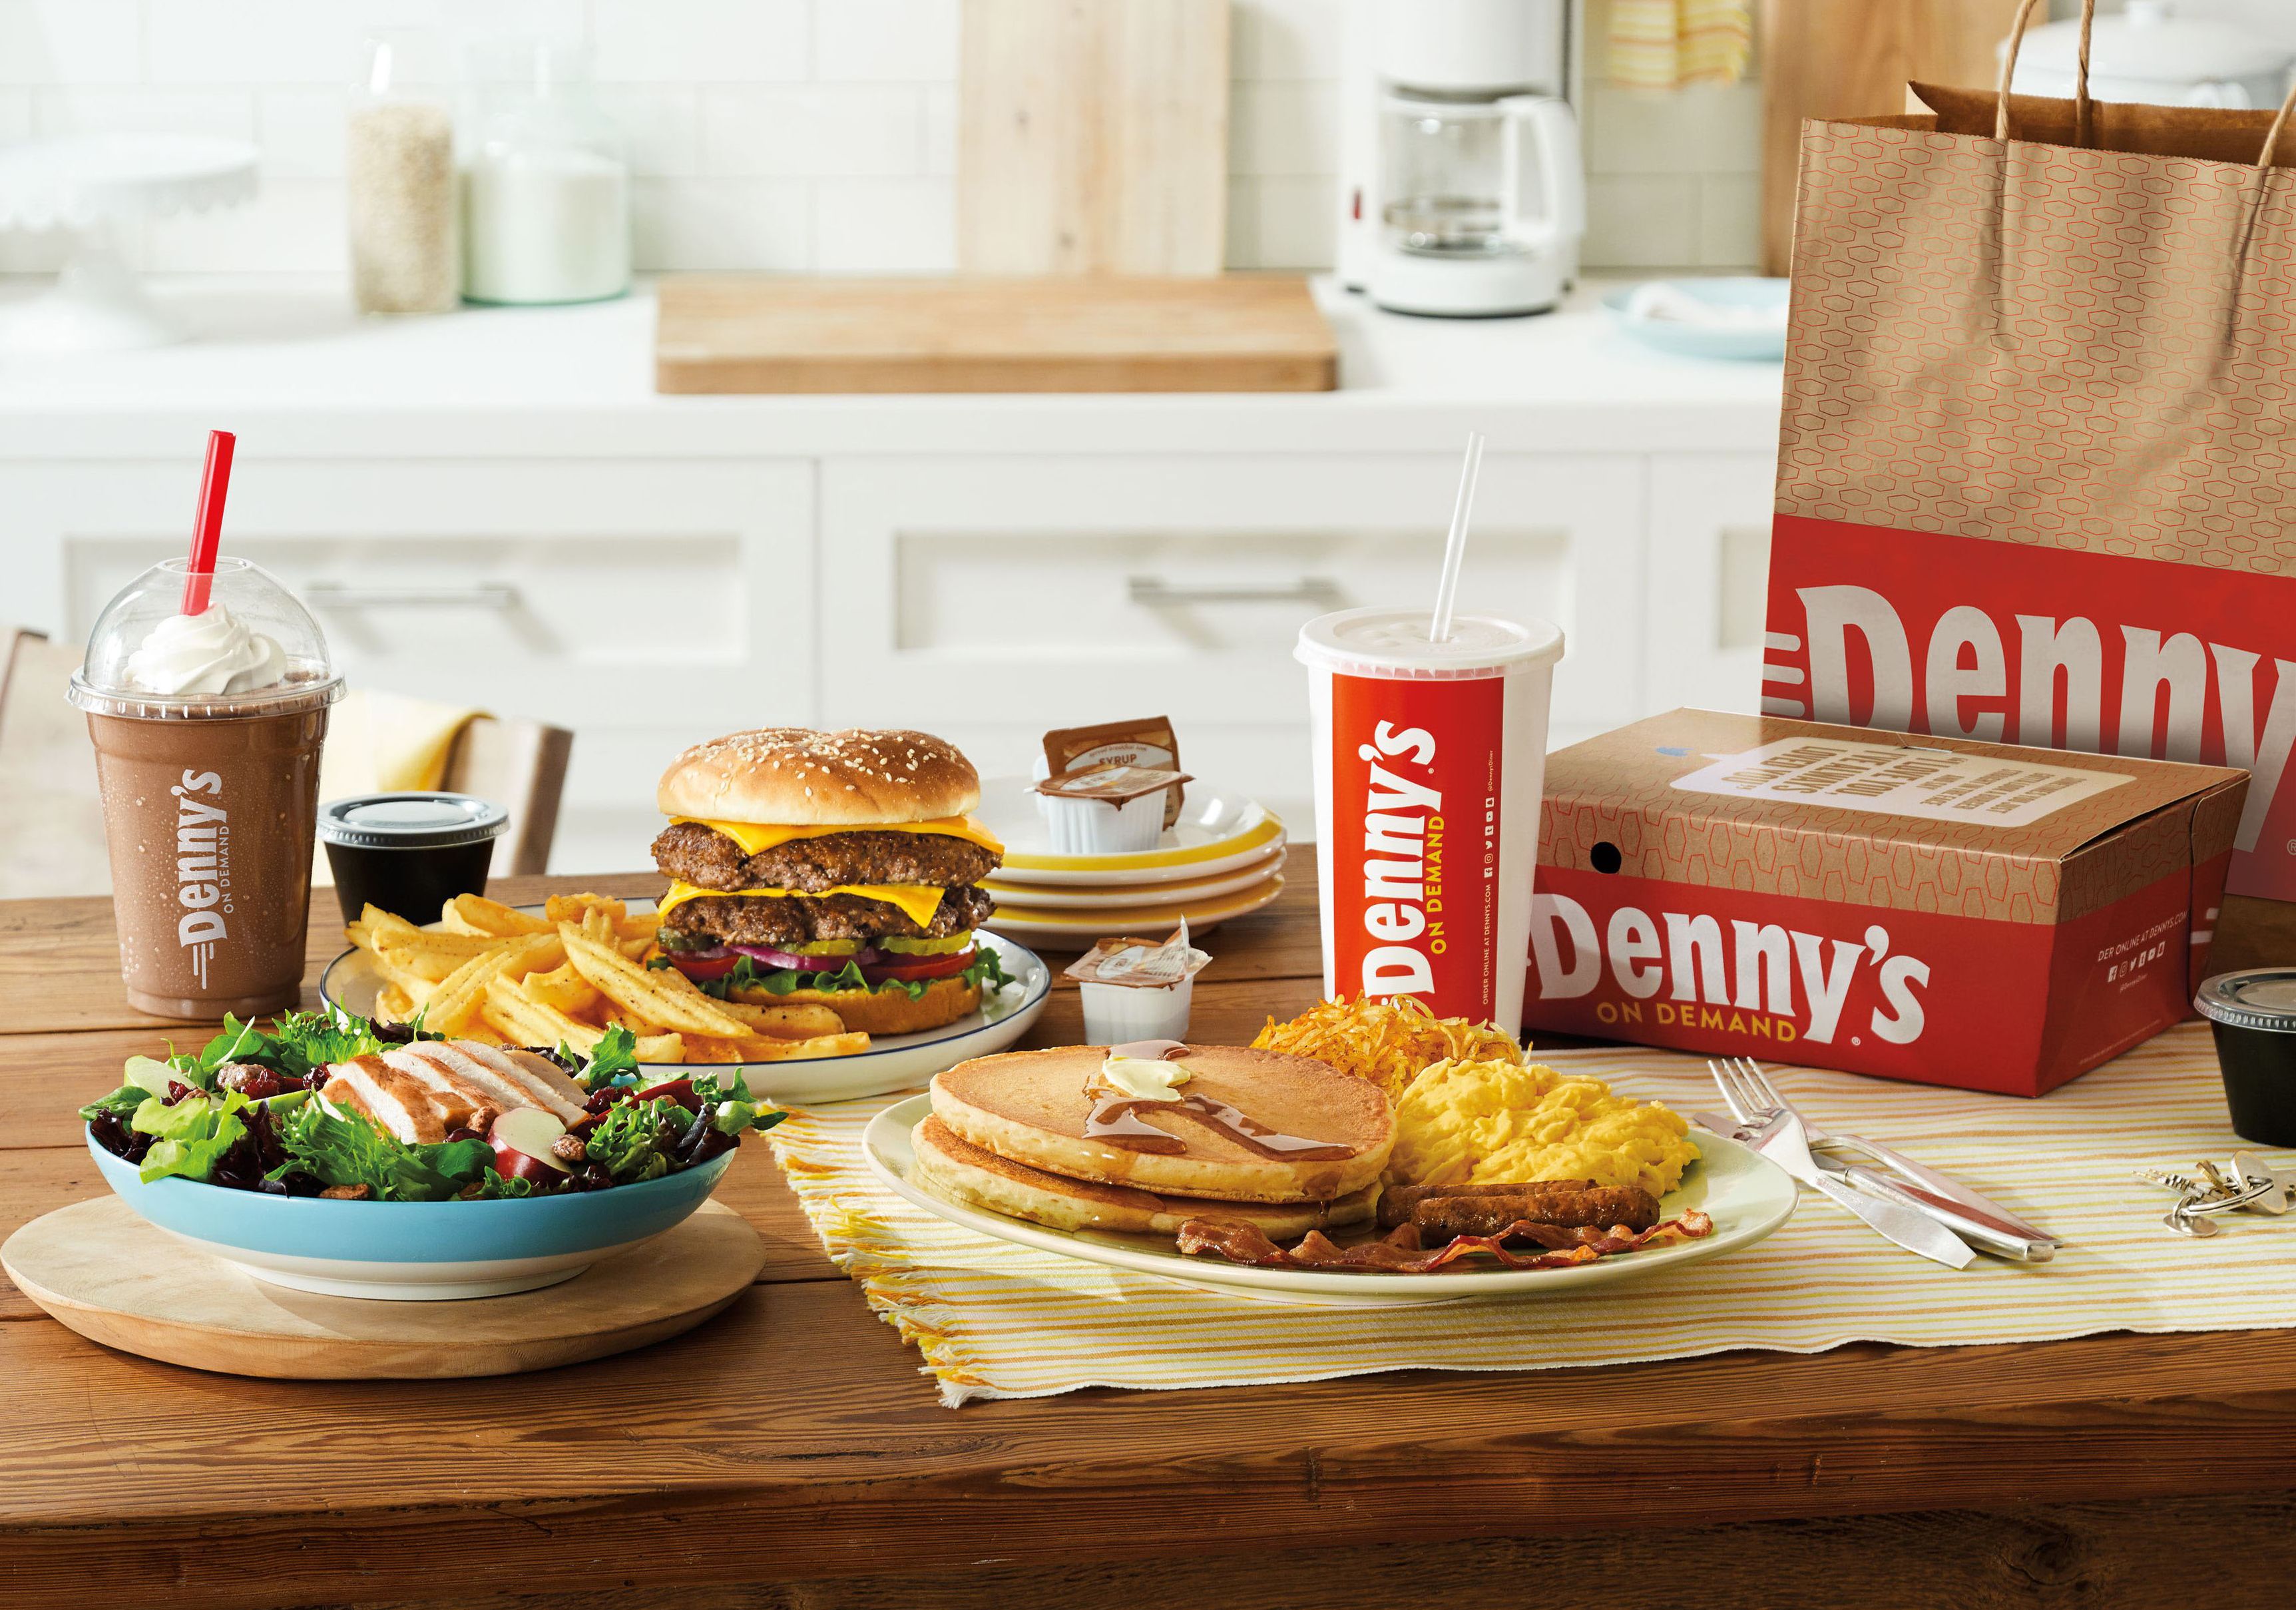 Join Denny's Rewards for a Limited Time Only and Receive 20% Off Your First Order